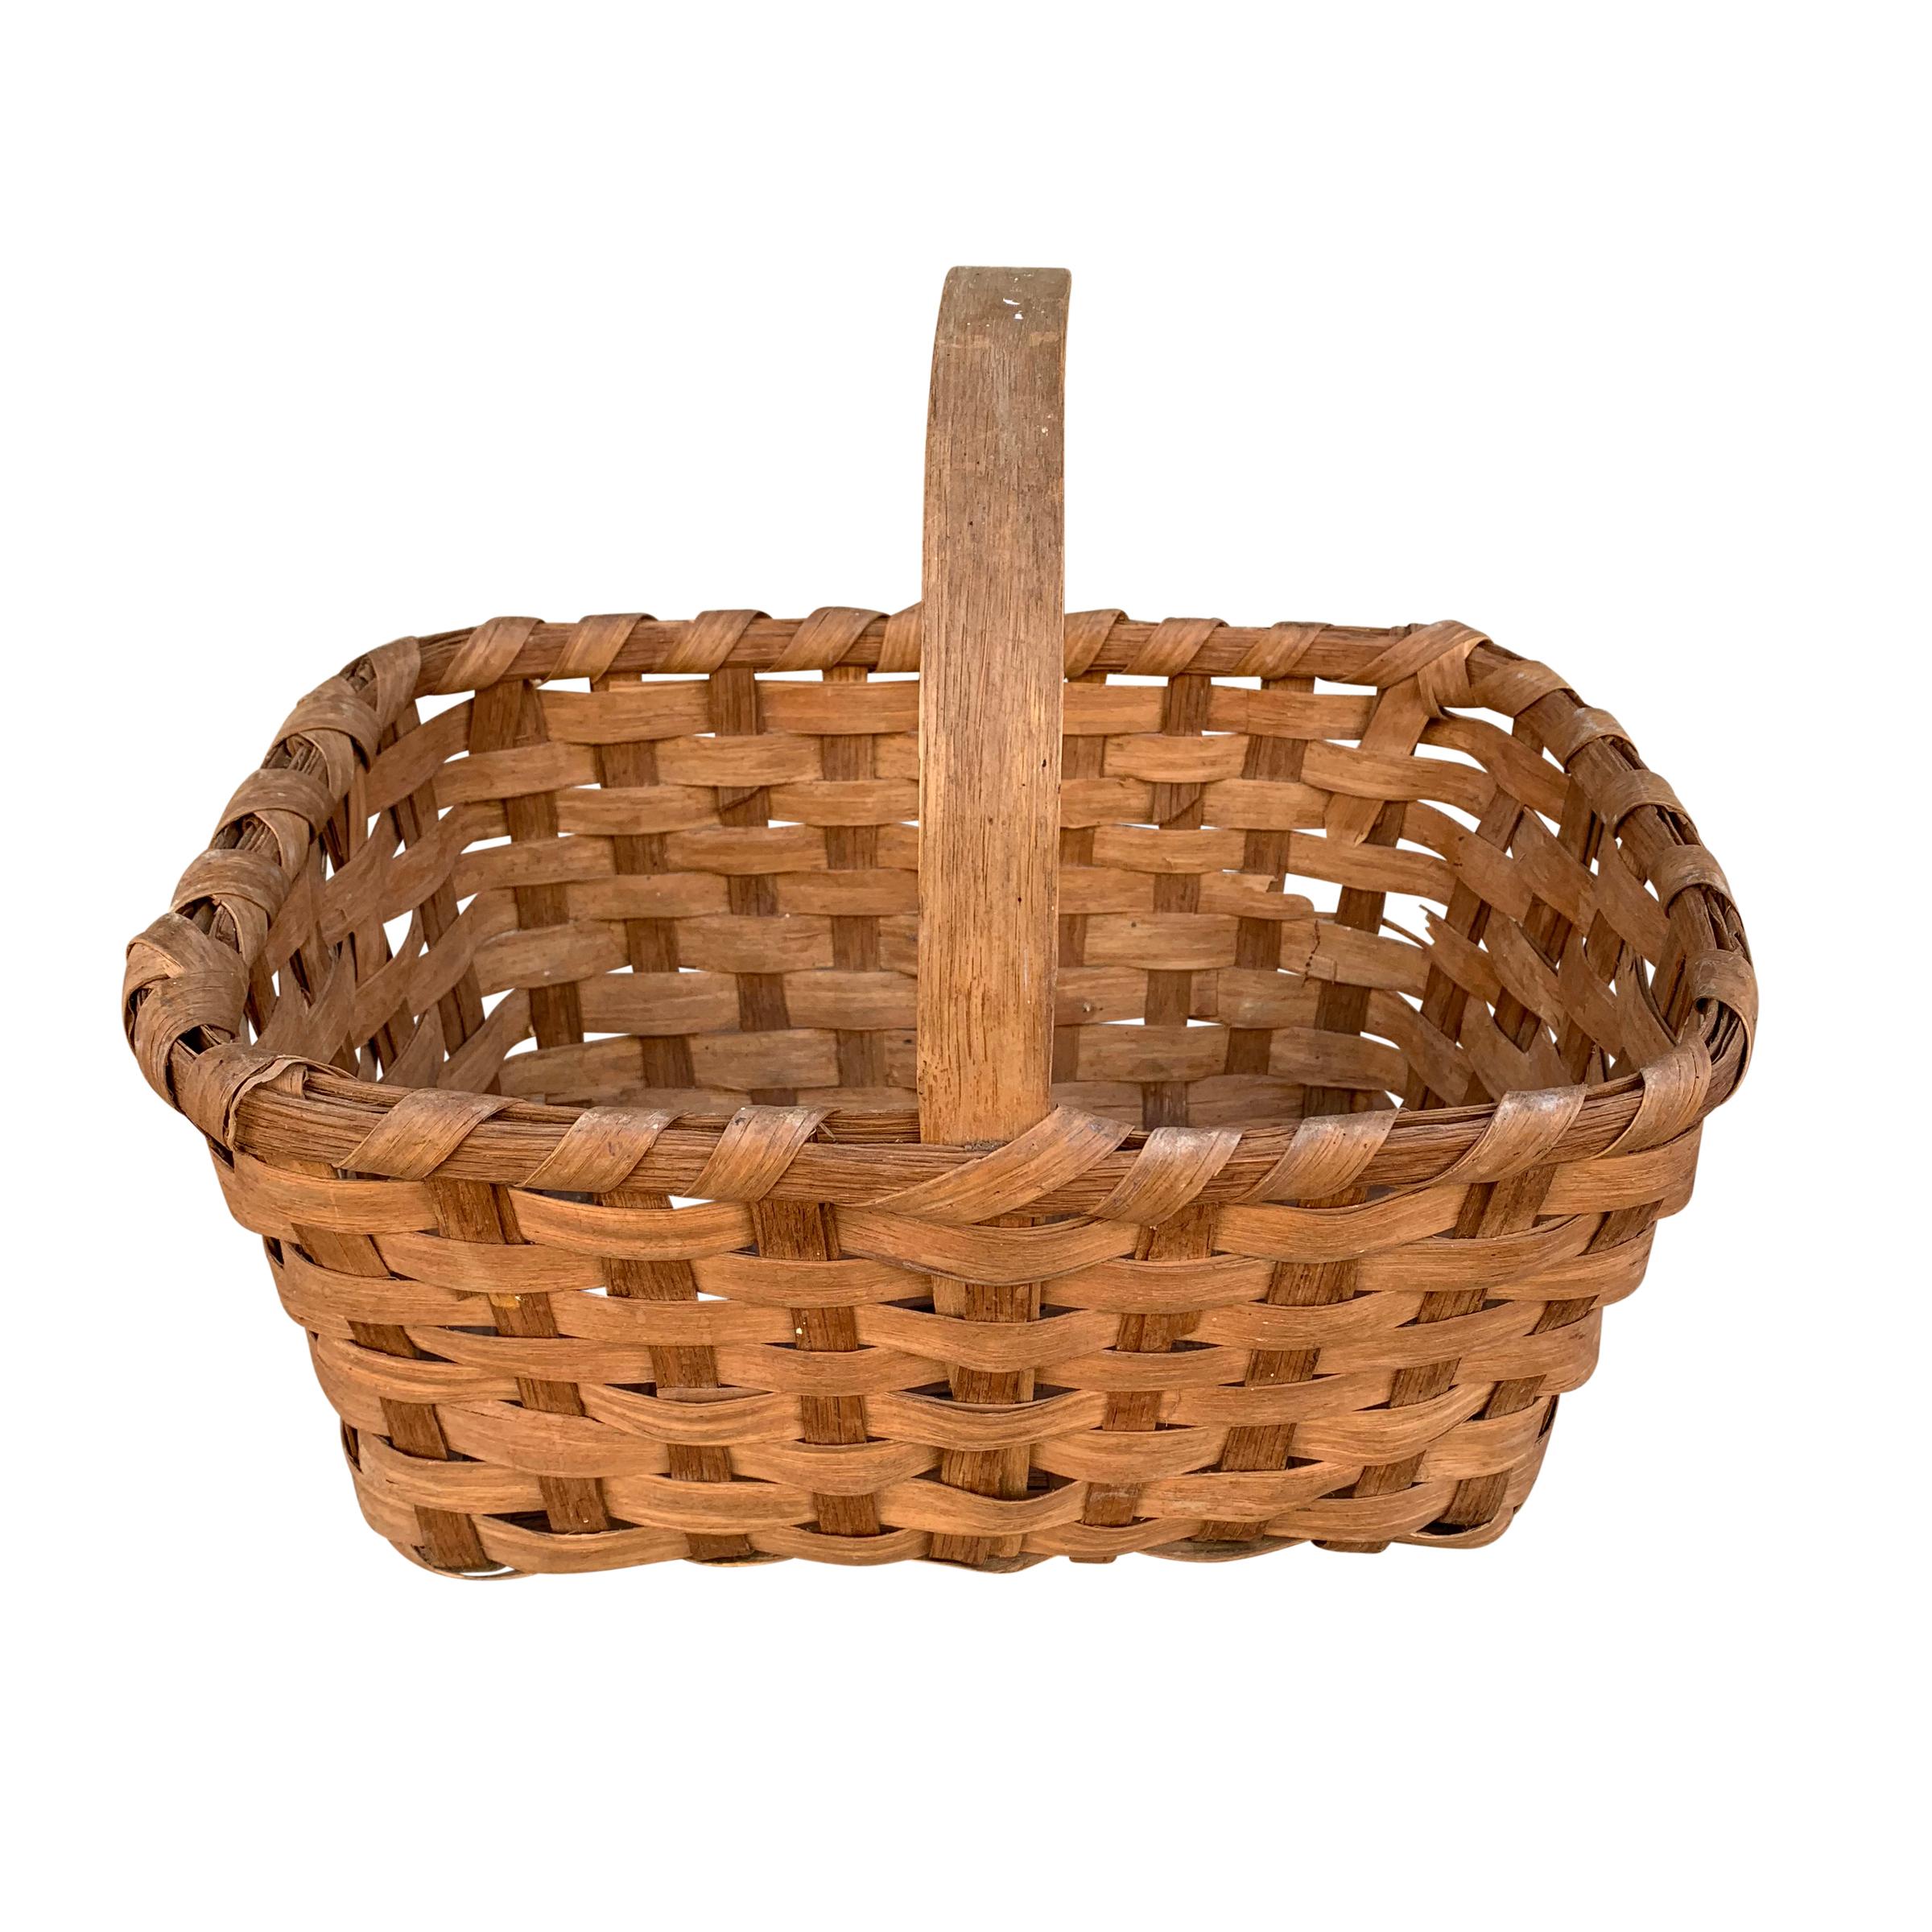 A beautiful early 20th century American oak splint gathering basket with a bentwood handle, banded rim, and wonderful patina. Gathering baskets were used to gather fruits, vegetables, flowers, and eggs on the farm.